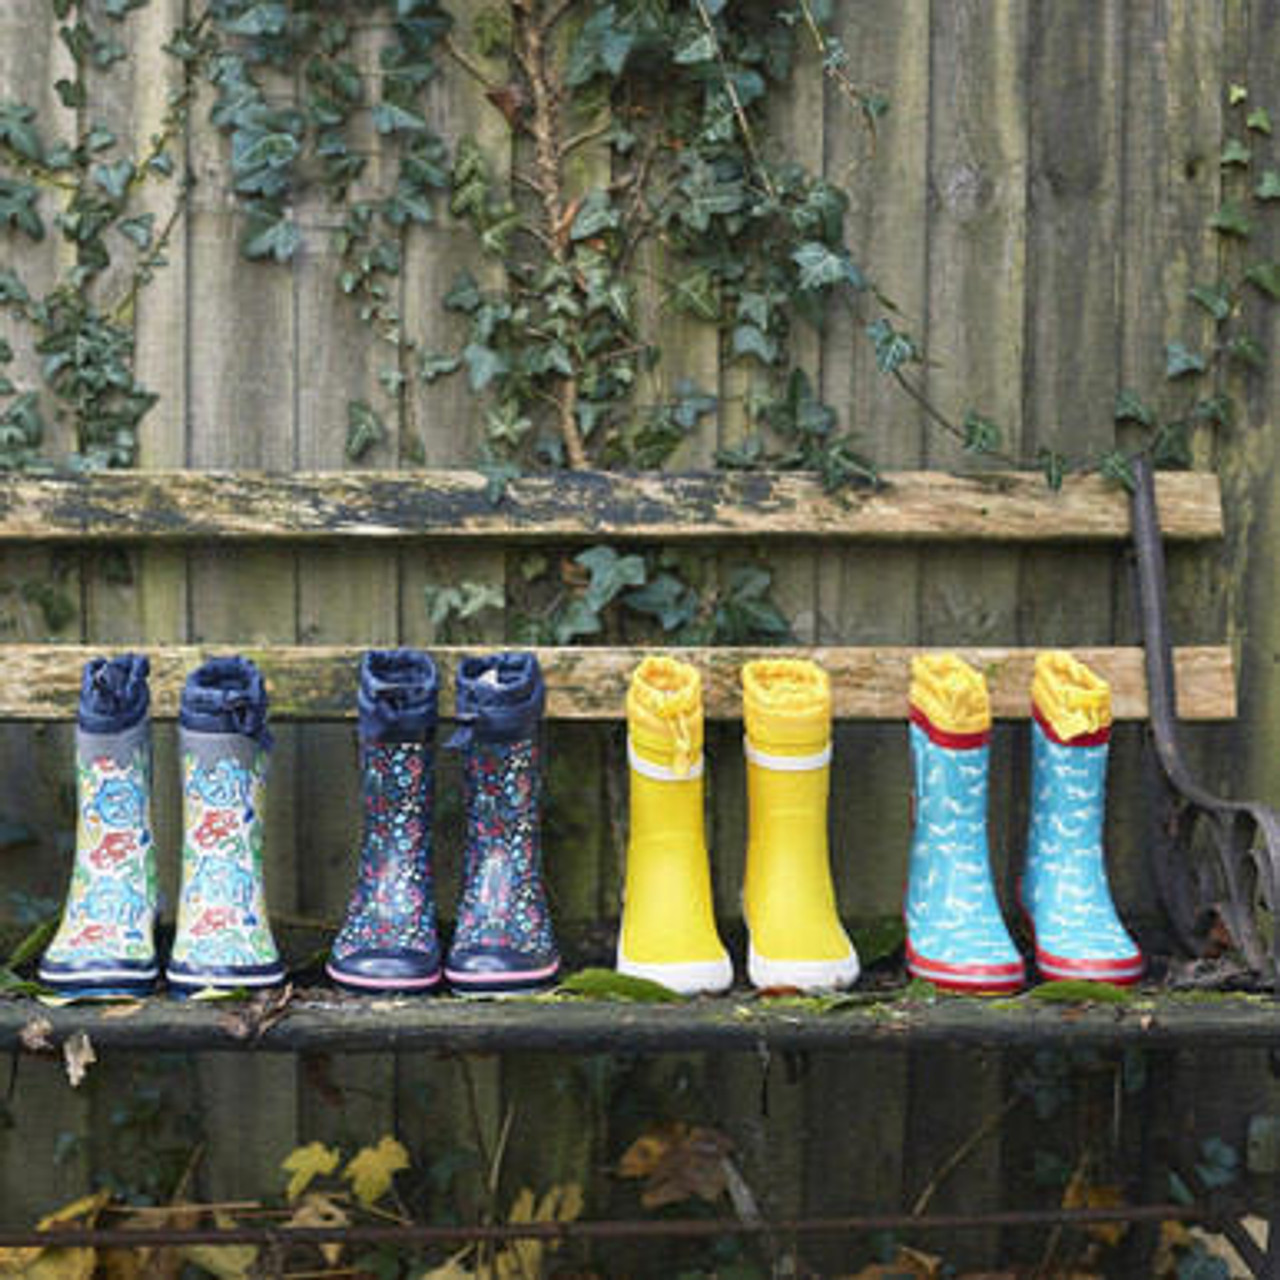 Big Puddle, Blue shark water resistant wellies